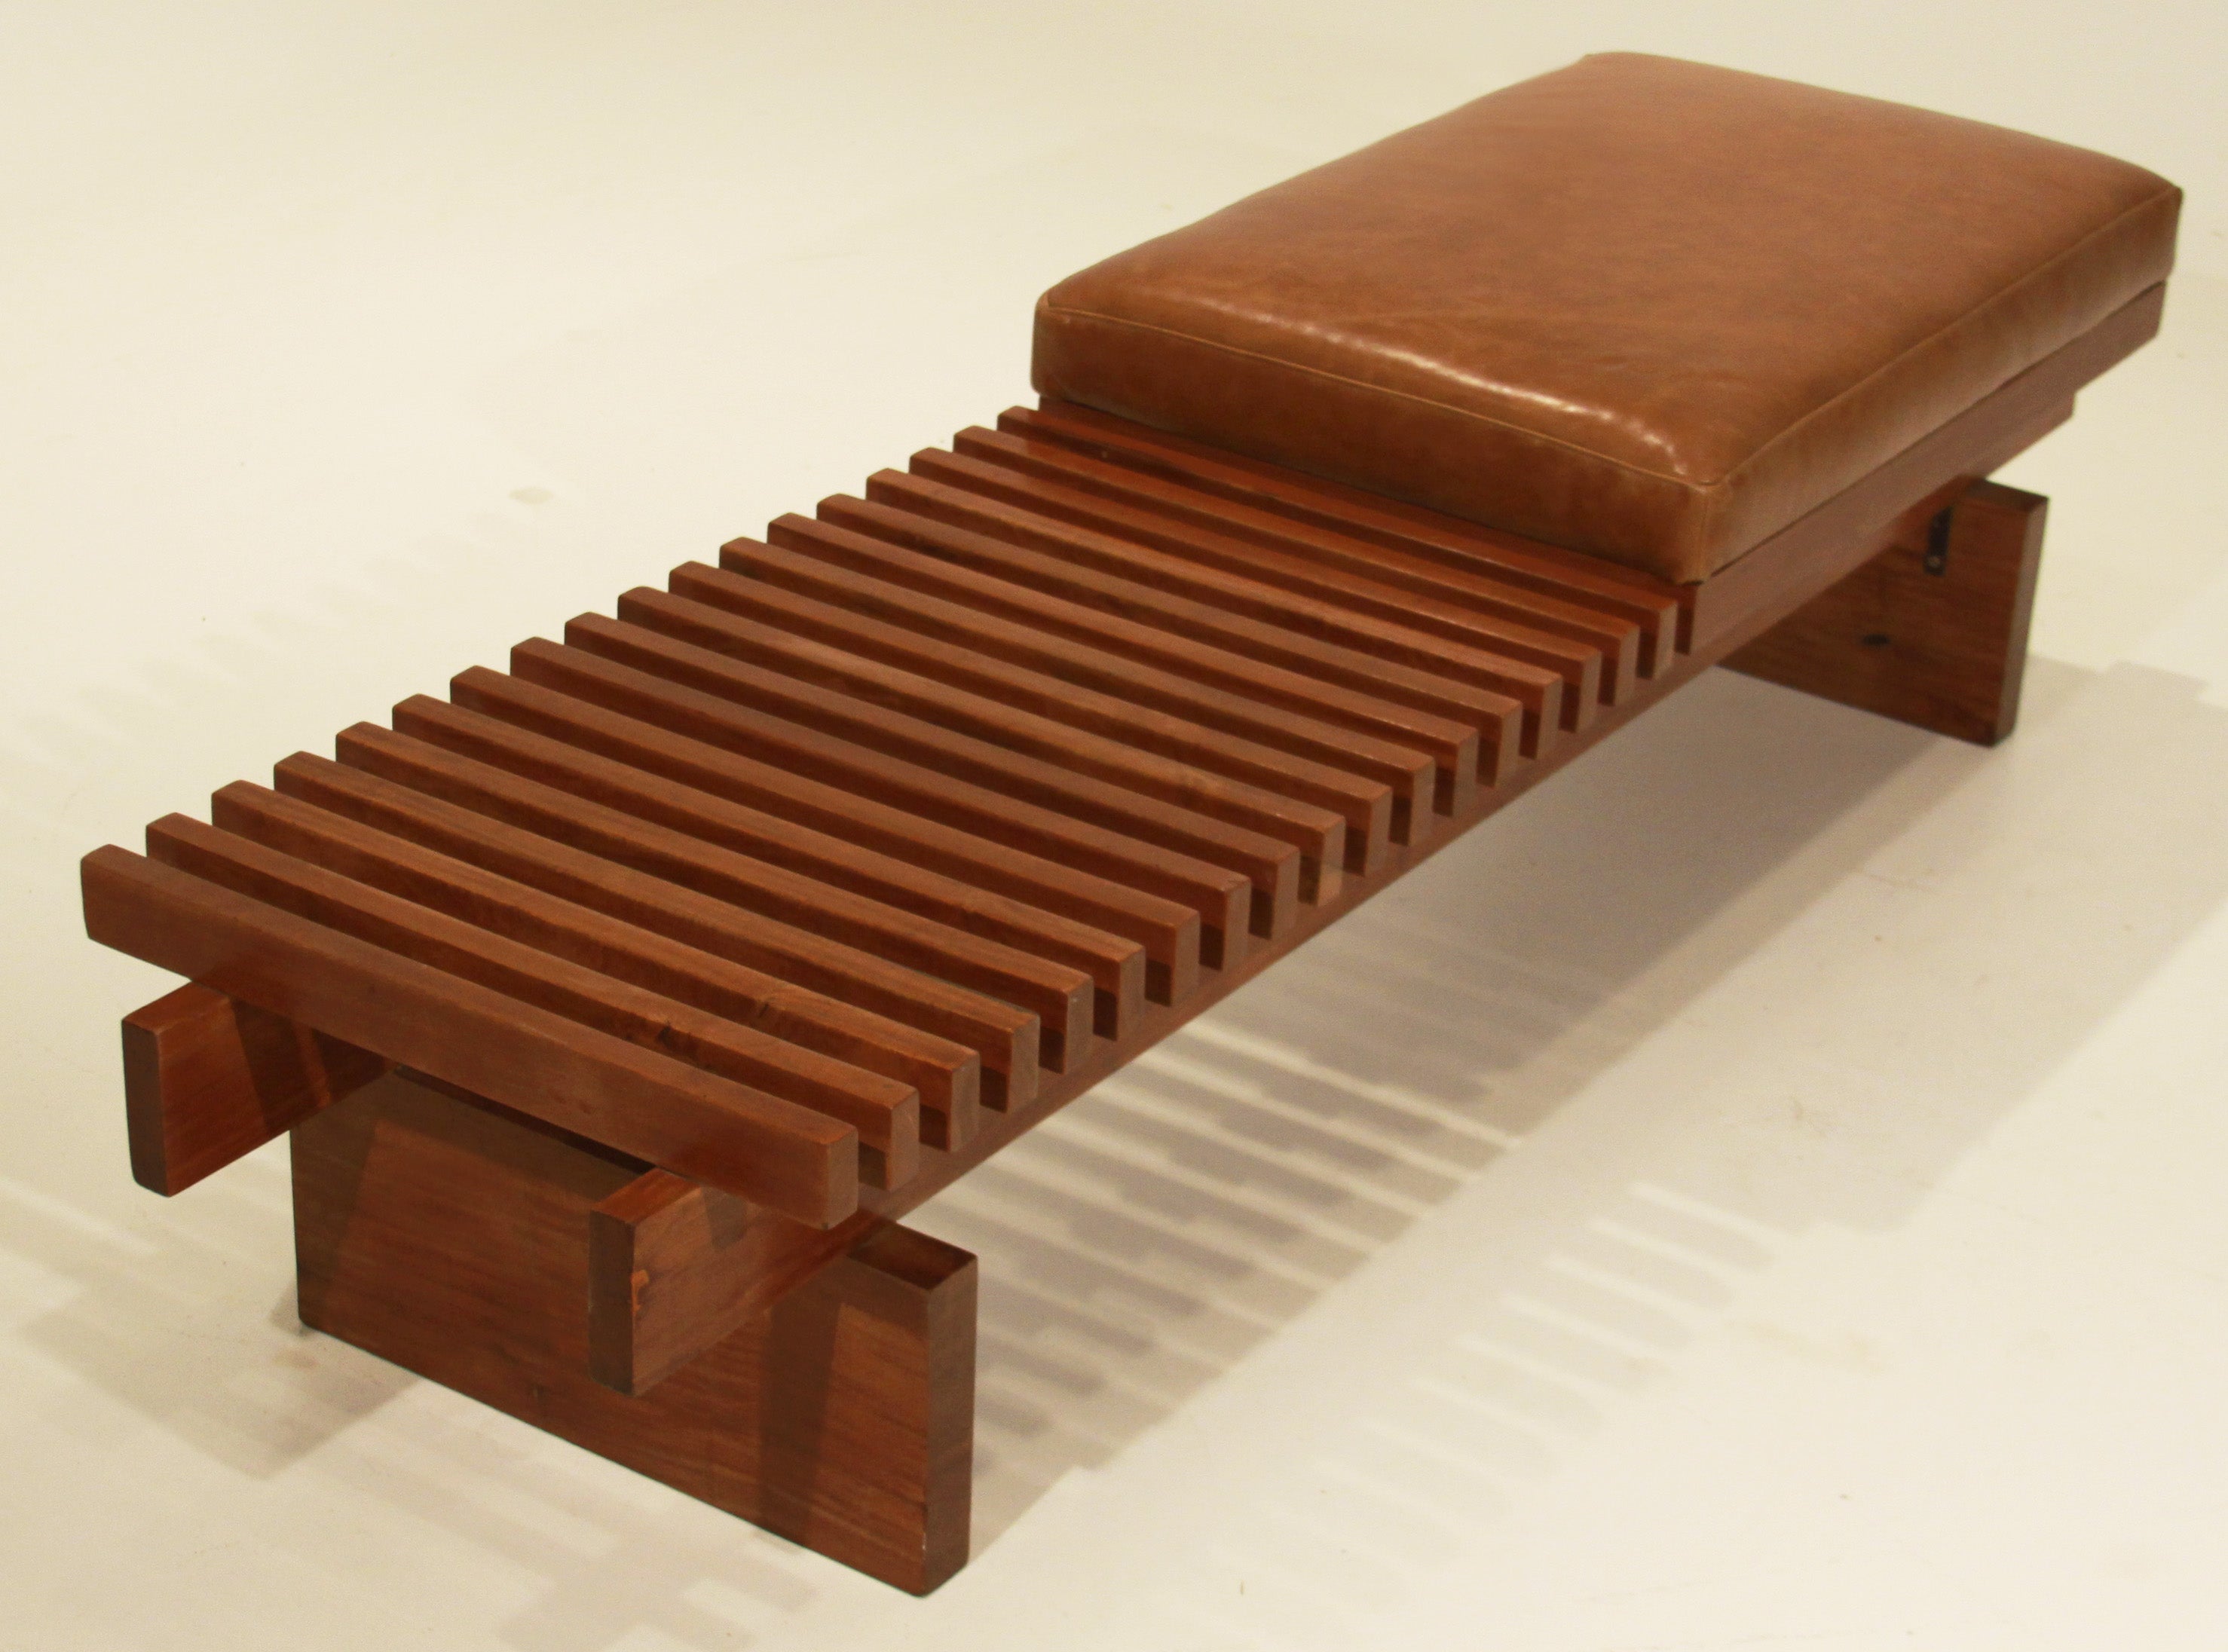 Slatted solid Caviuna bench with leather seat and solid wood base